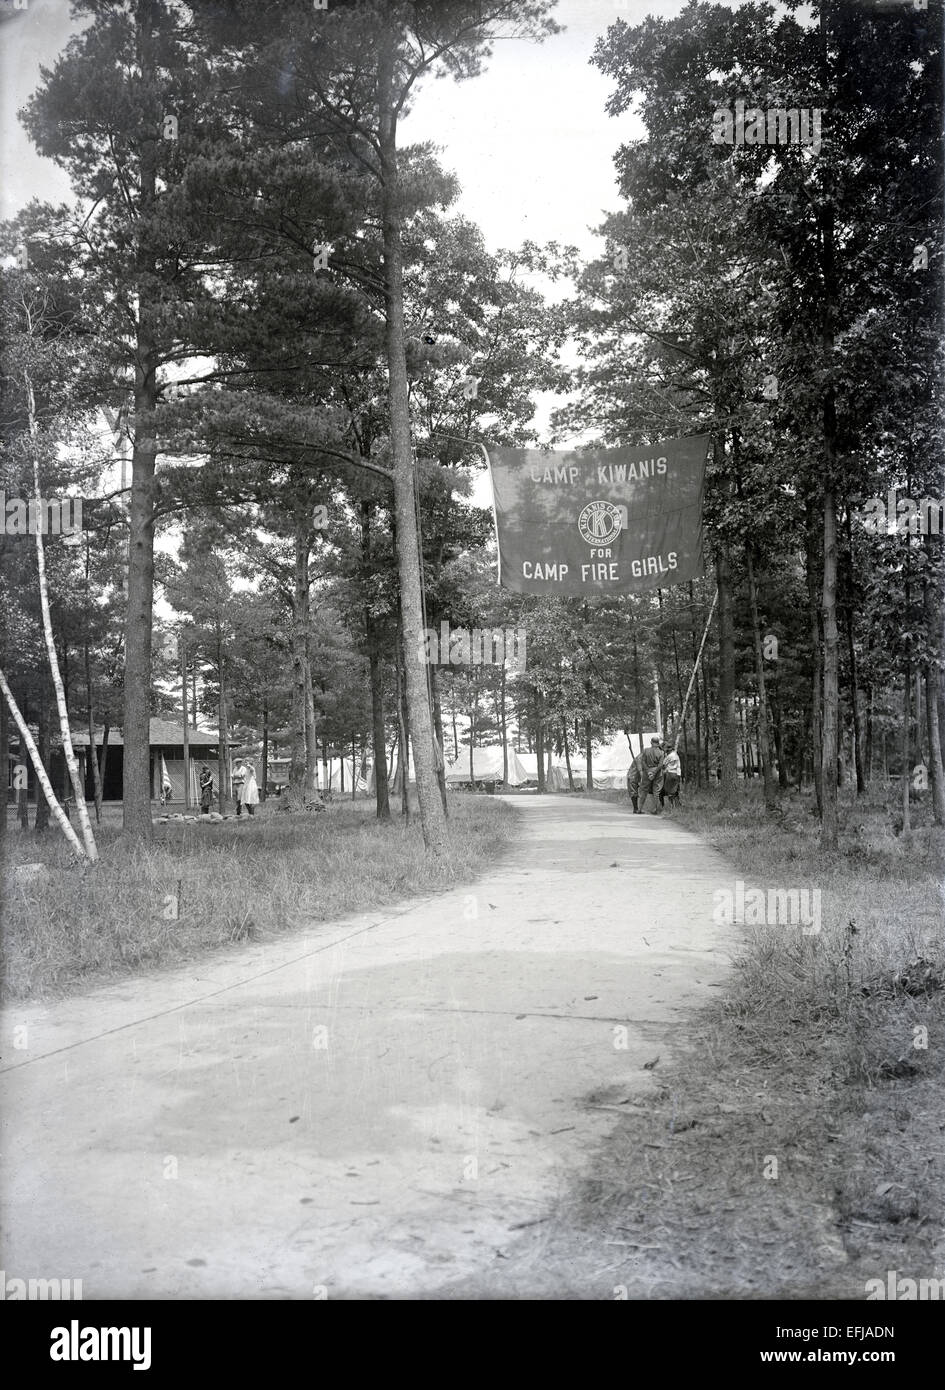 Antique c1925 photograph, Kiwanis Club for Camp Fire Girls campground. Location is possibly the The Kiwanis Club of Boston, Camp for Camp Fire Girls in Hanson, Massachusetts, USA on Maquan Pond. Stock Photo